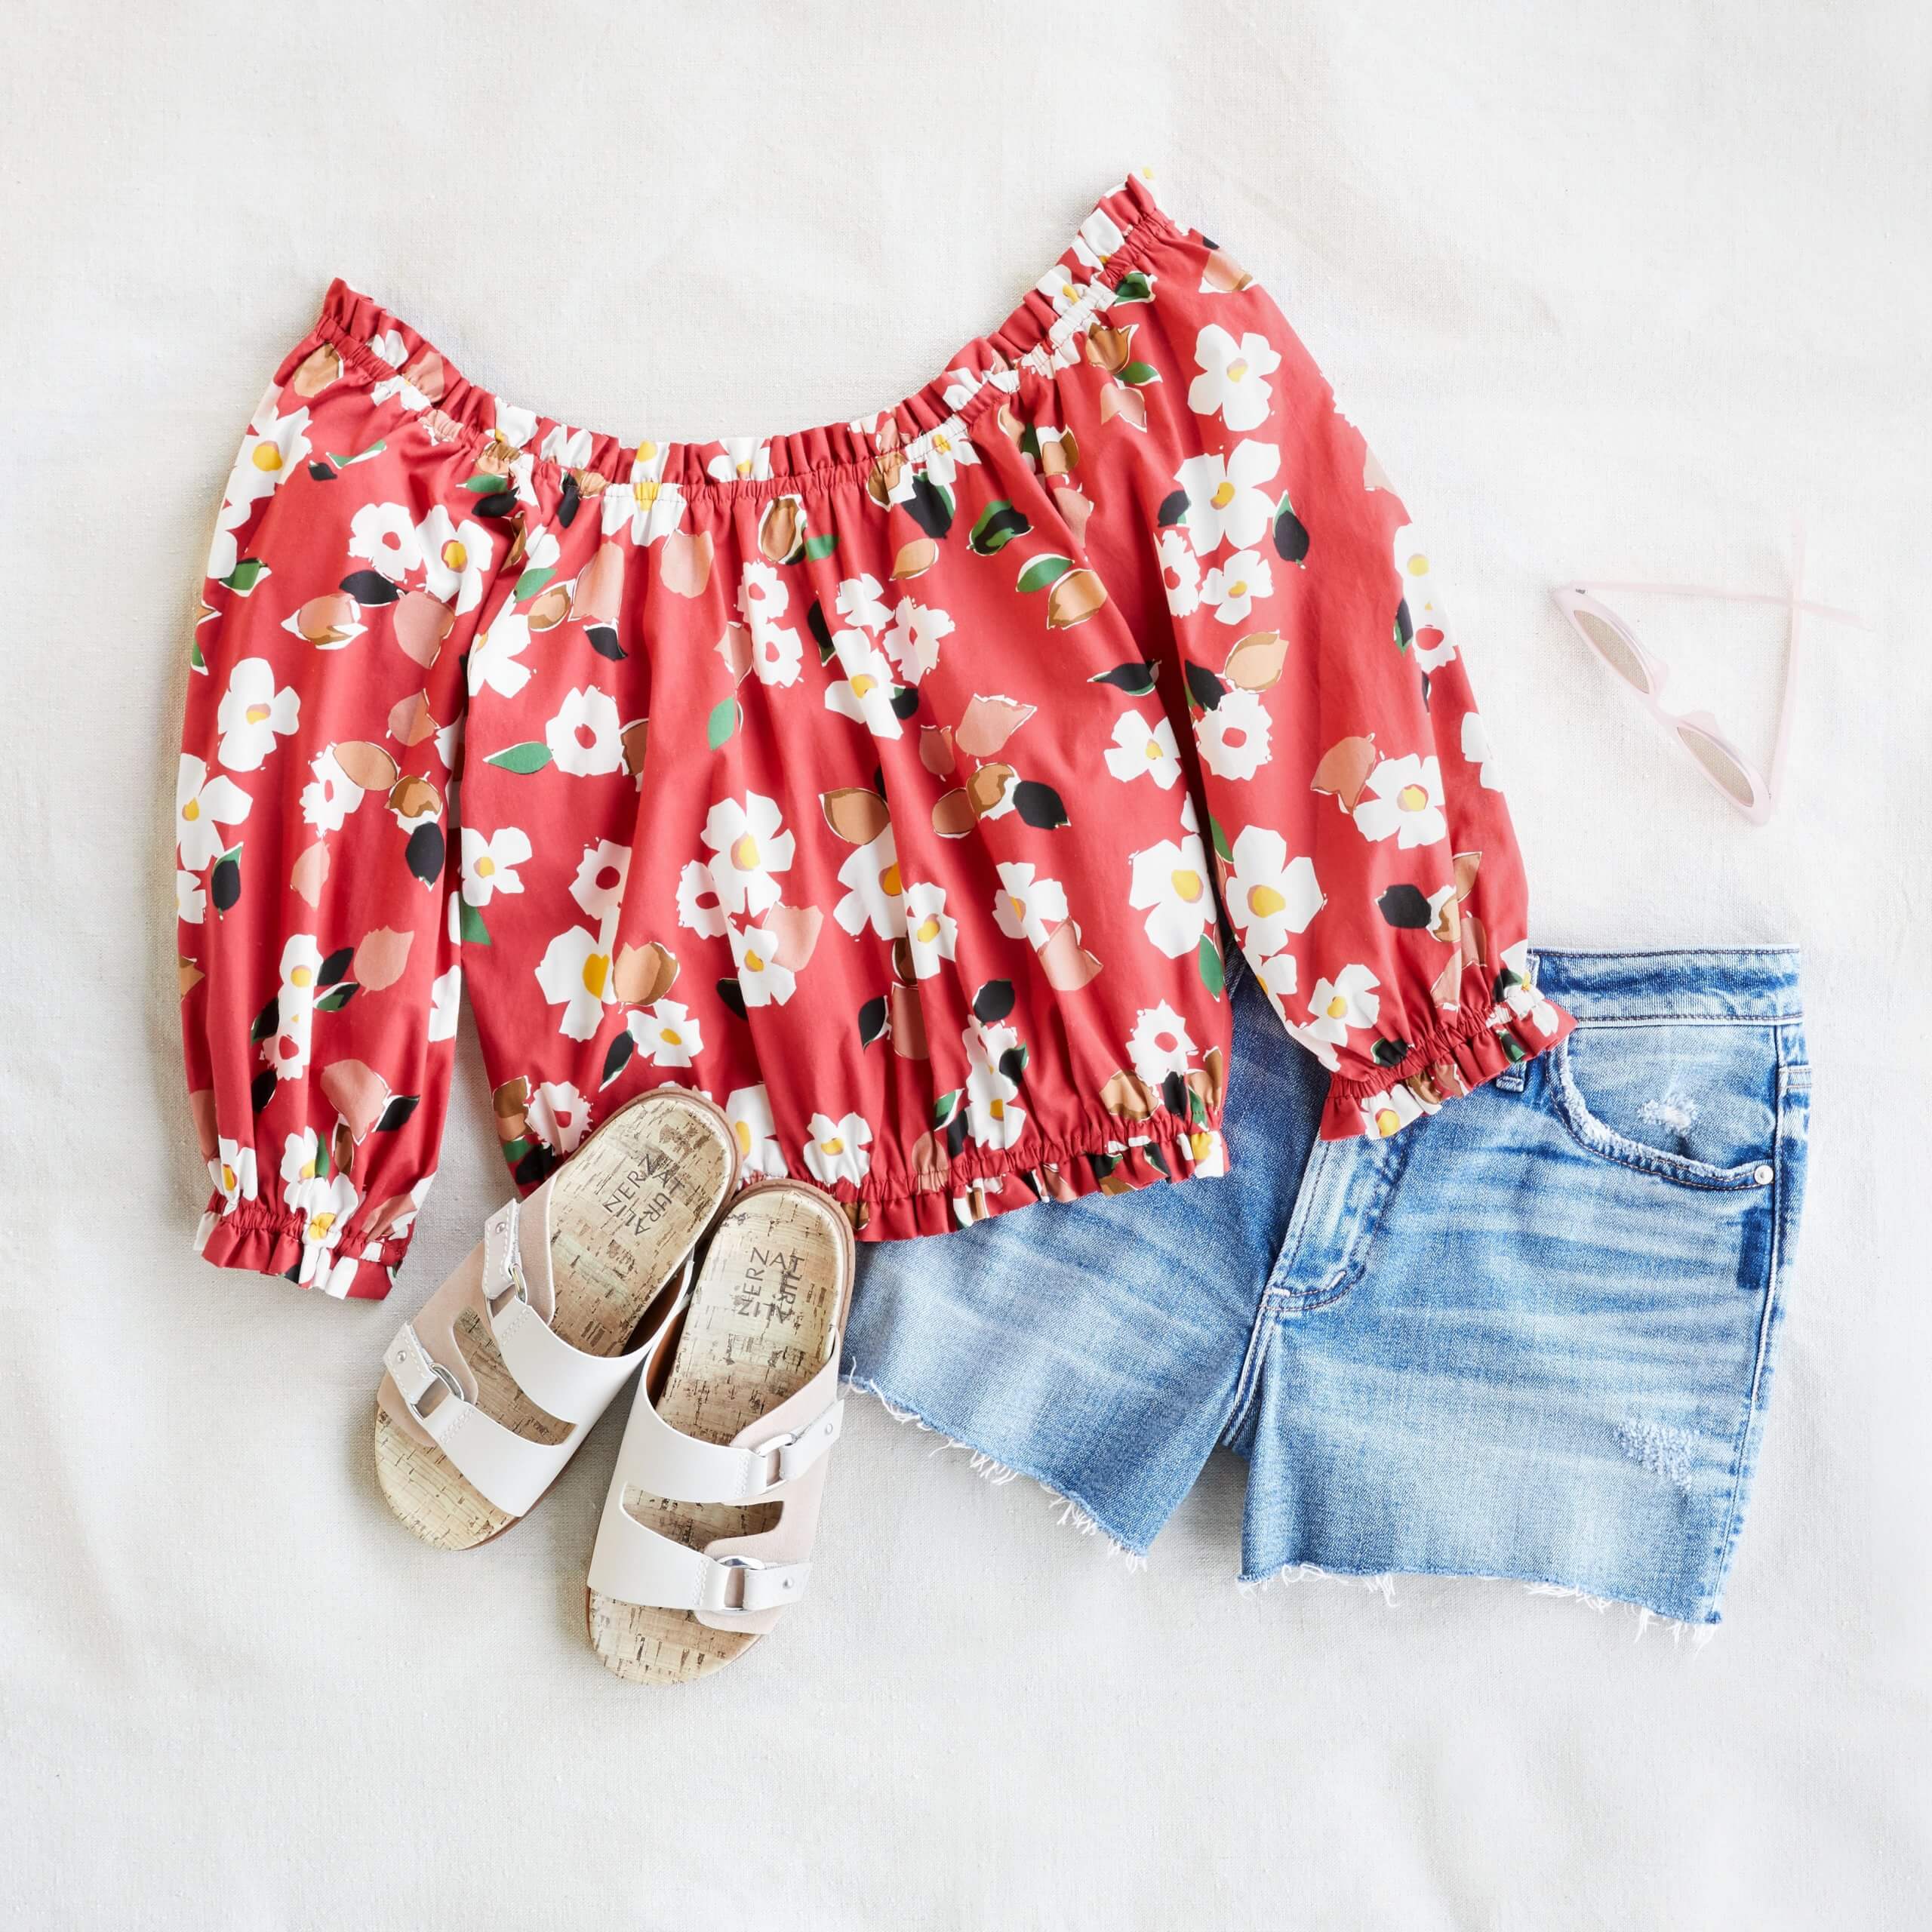 Stitch Fix women's 4th of July outfit laydown featuring blue denim shorts, white sandals, and red and white floral print blouse.